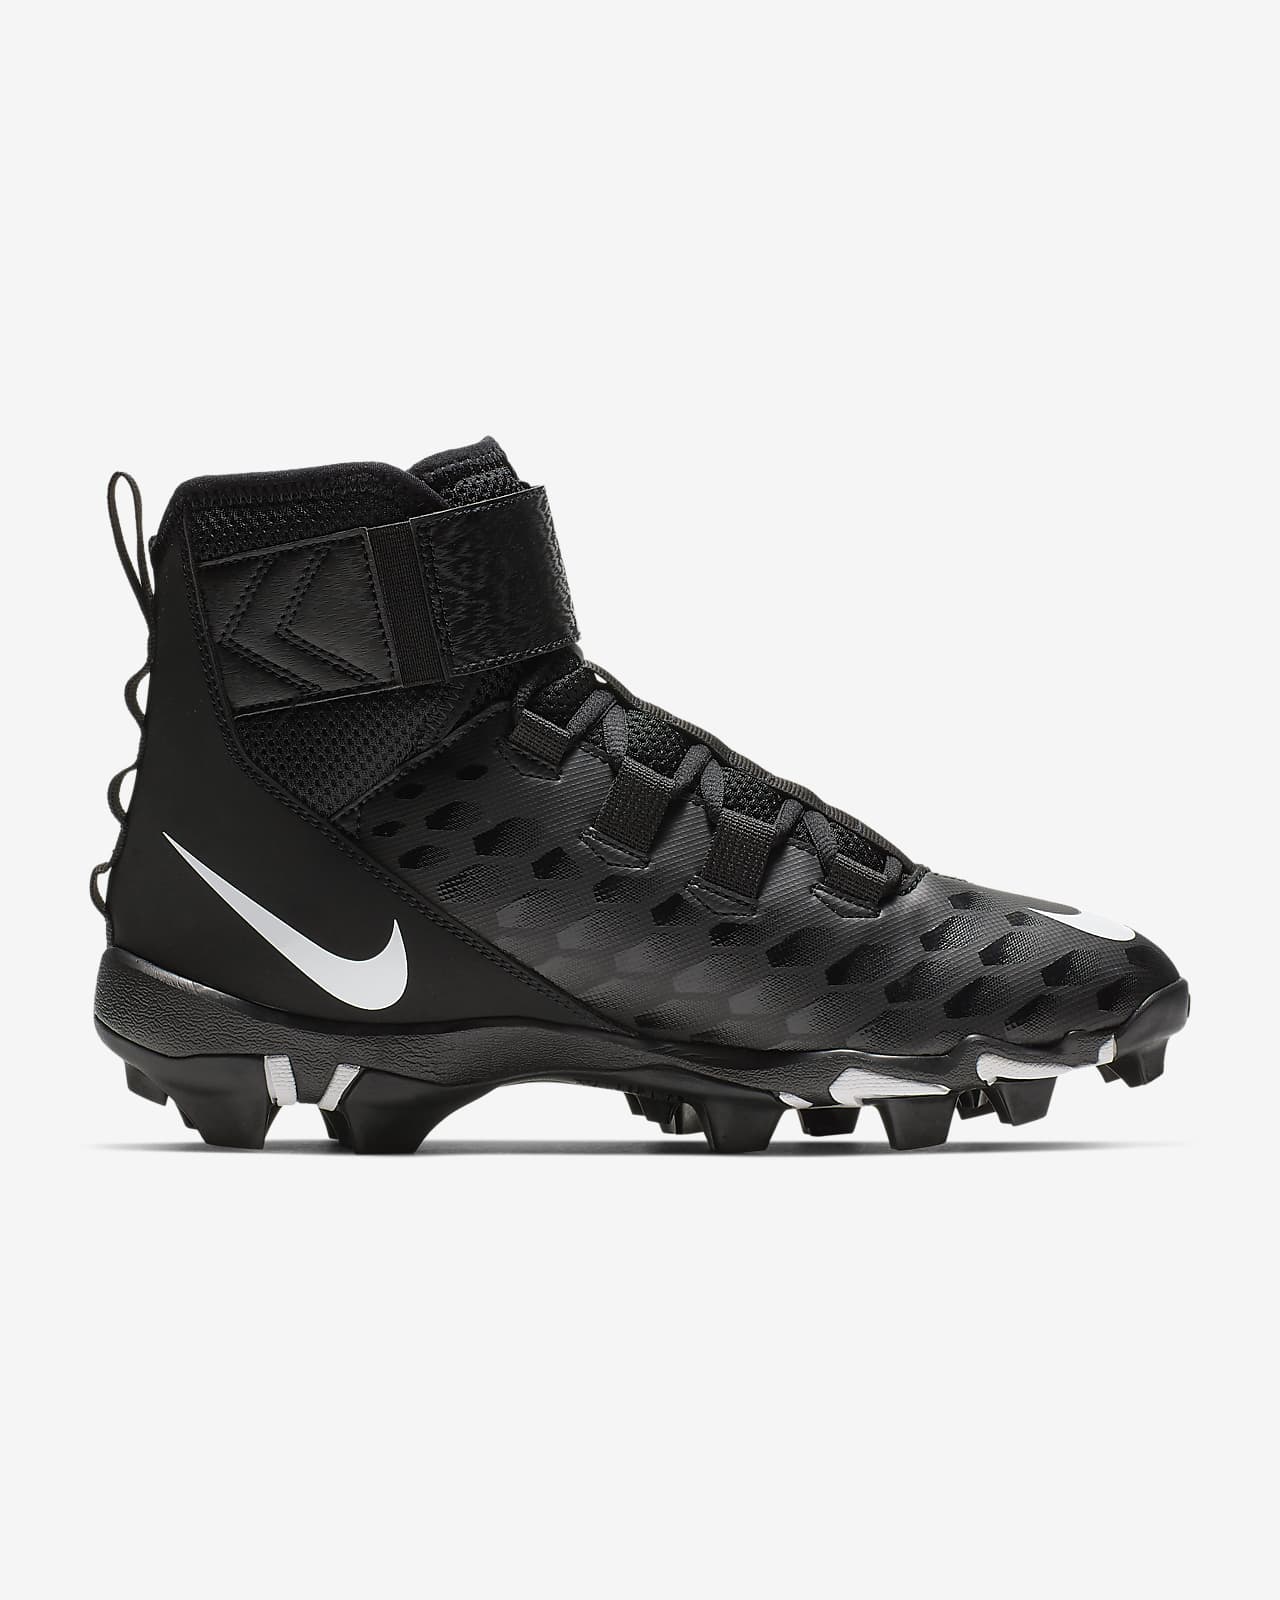 size 8 wide football cleats